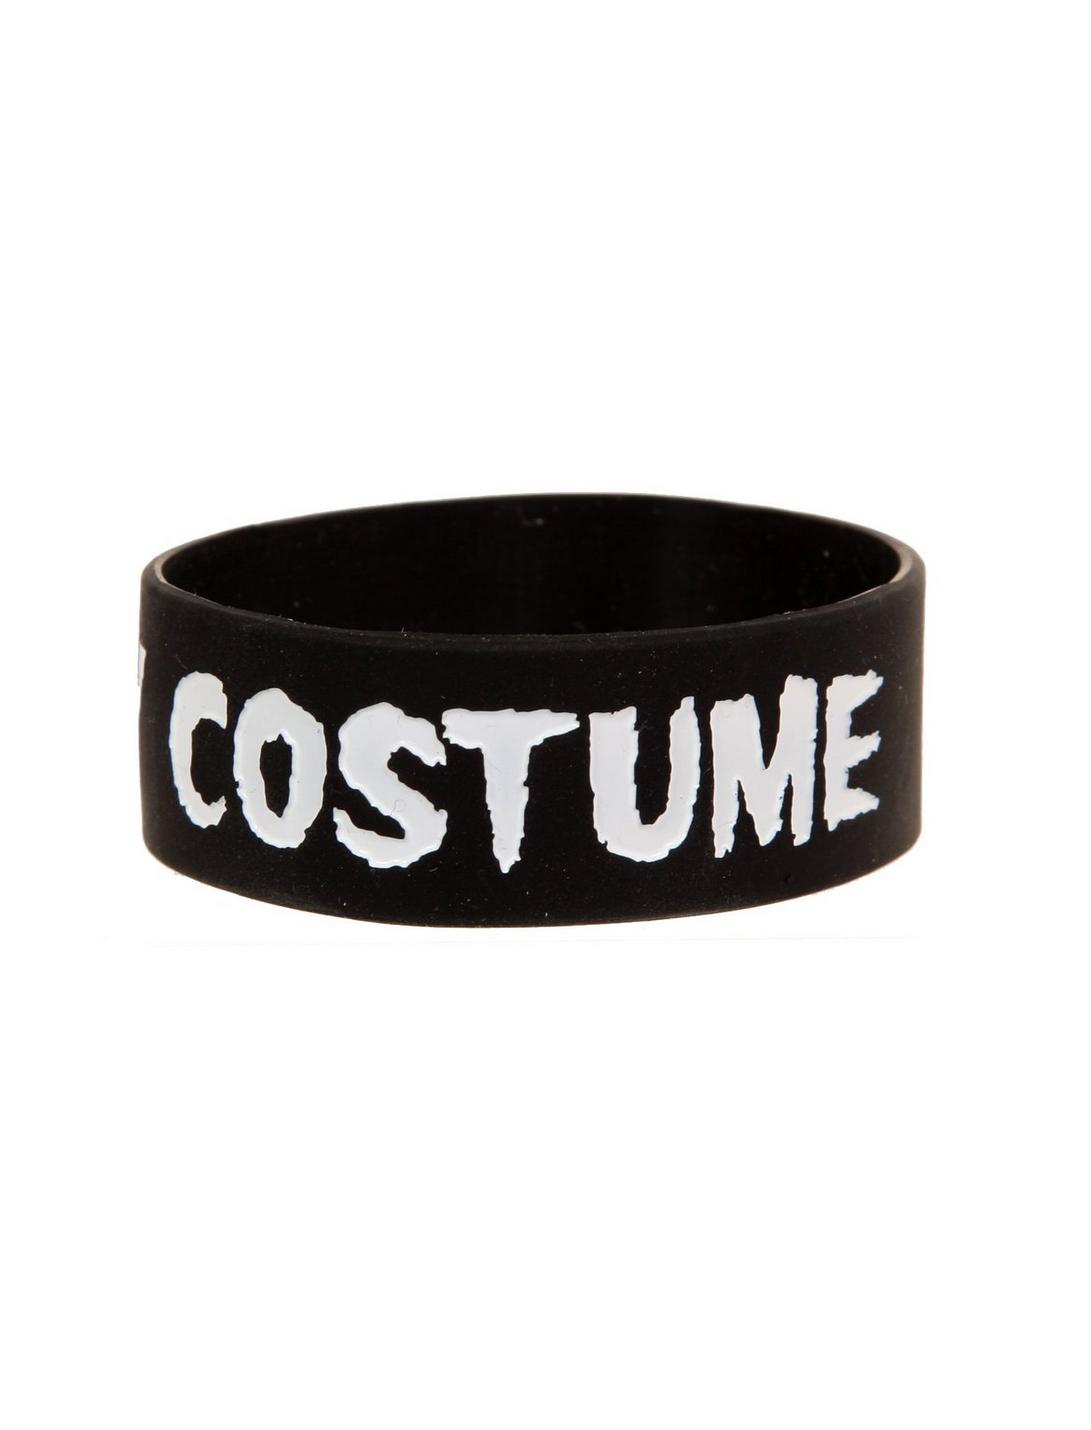 This Is My Costume Rubber Bracelet, , hi-res